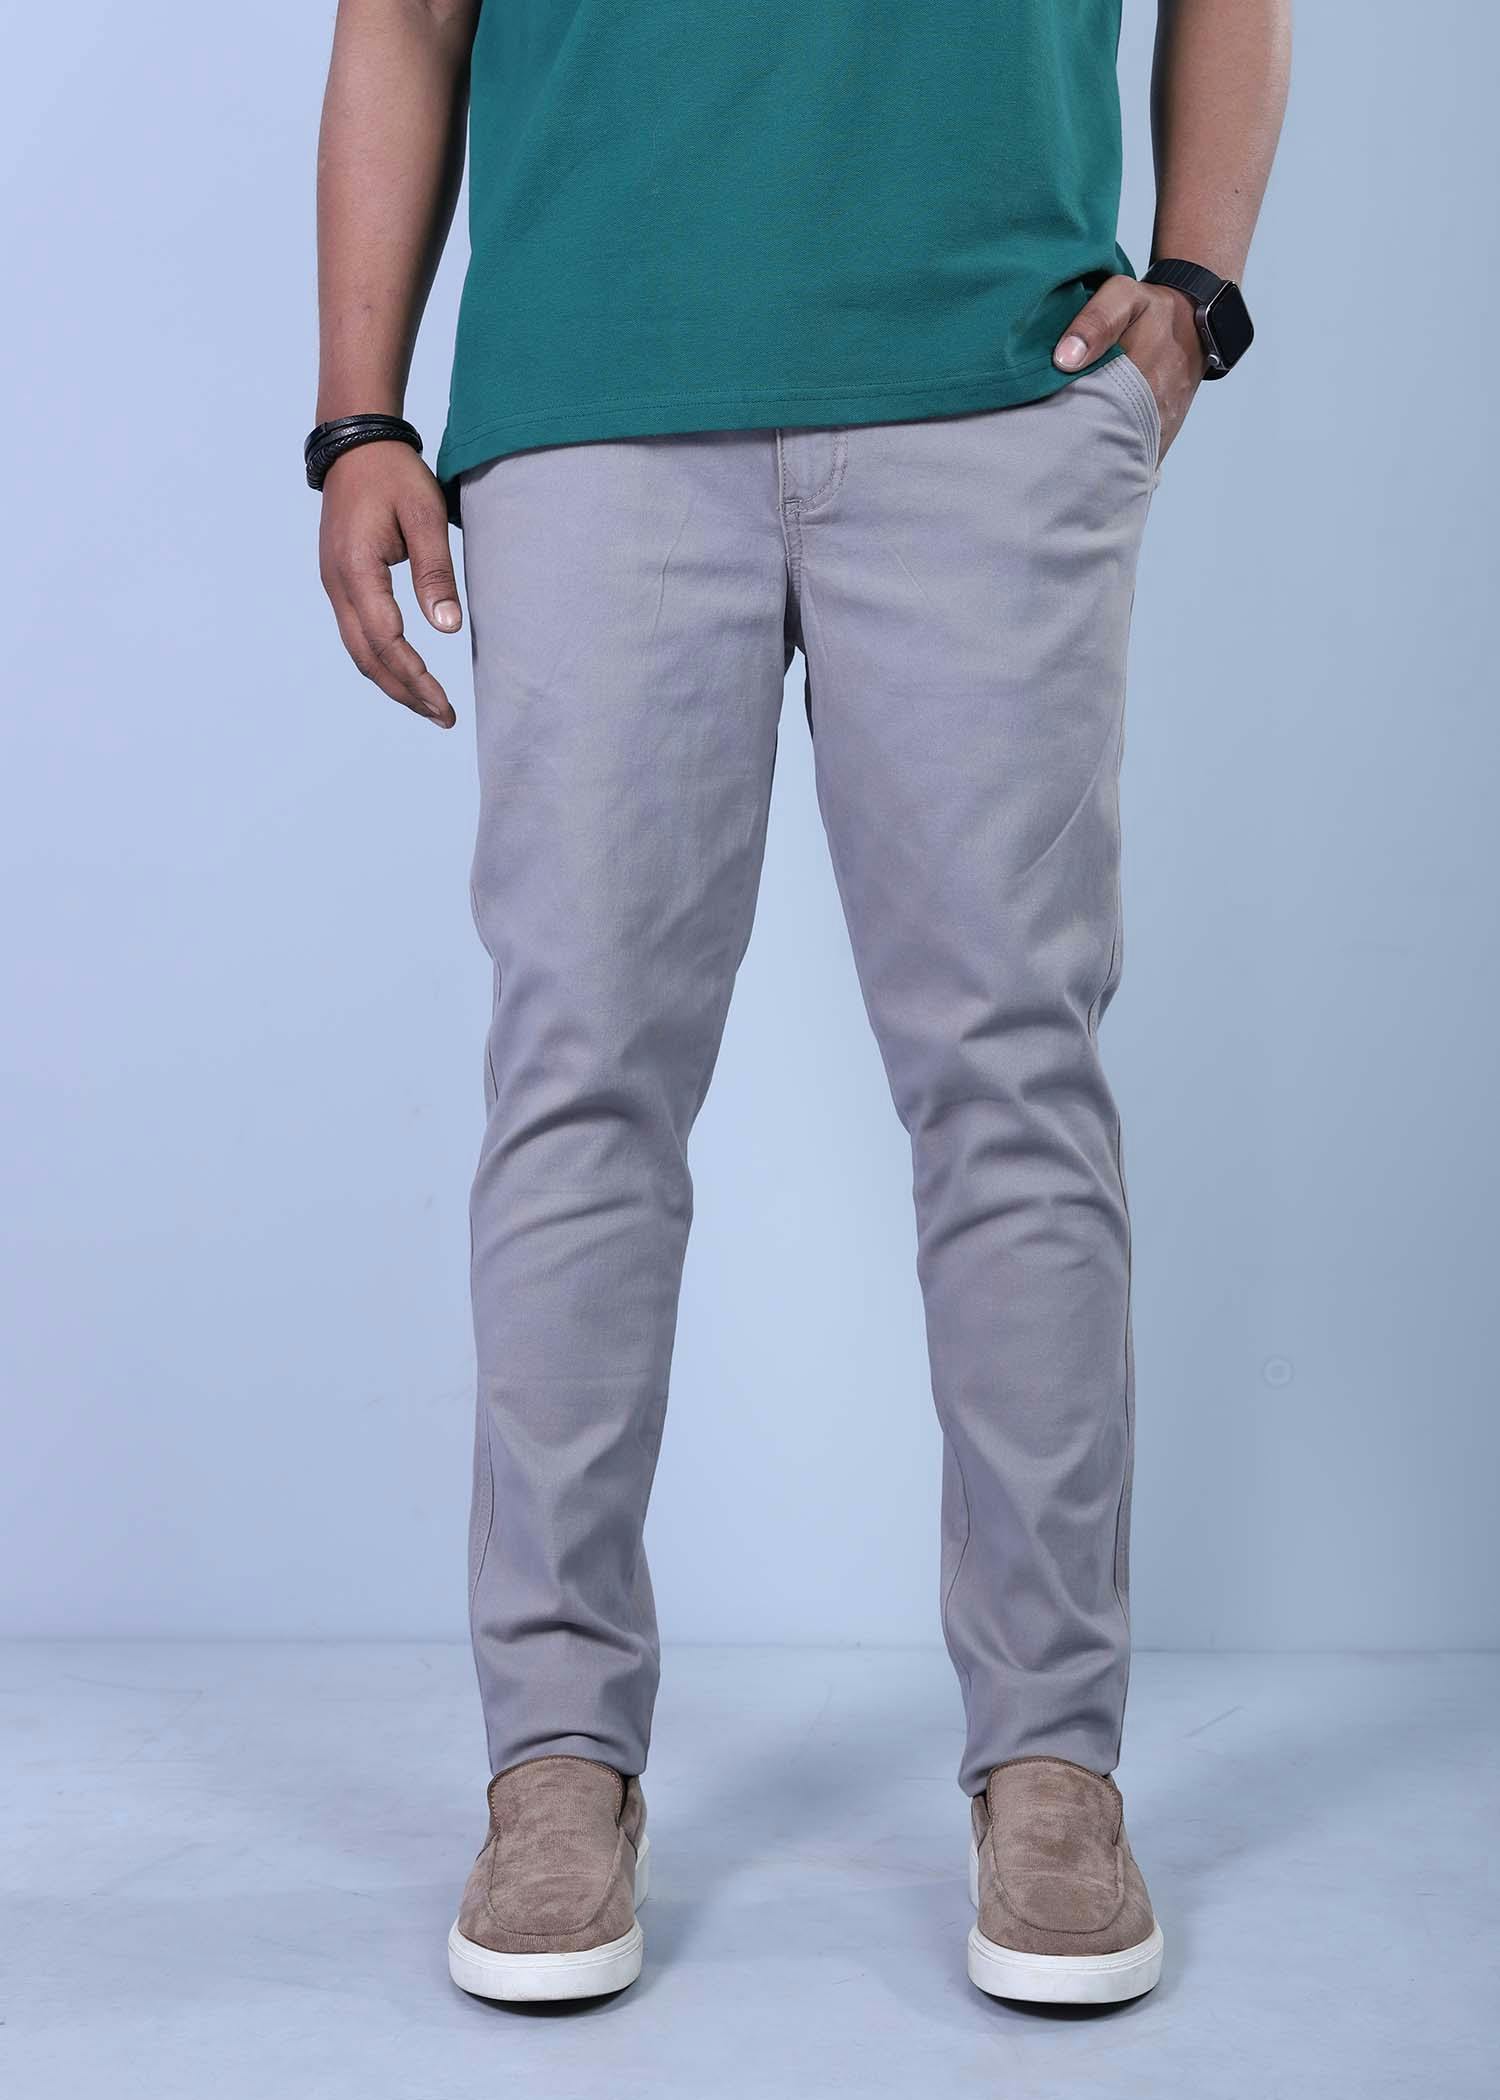 parla i chino pant sand color half front view